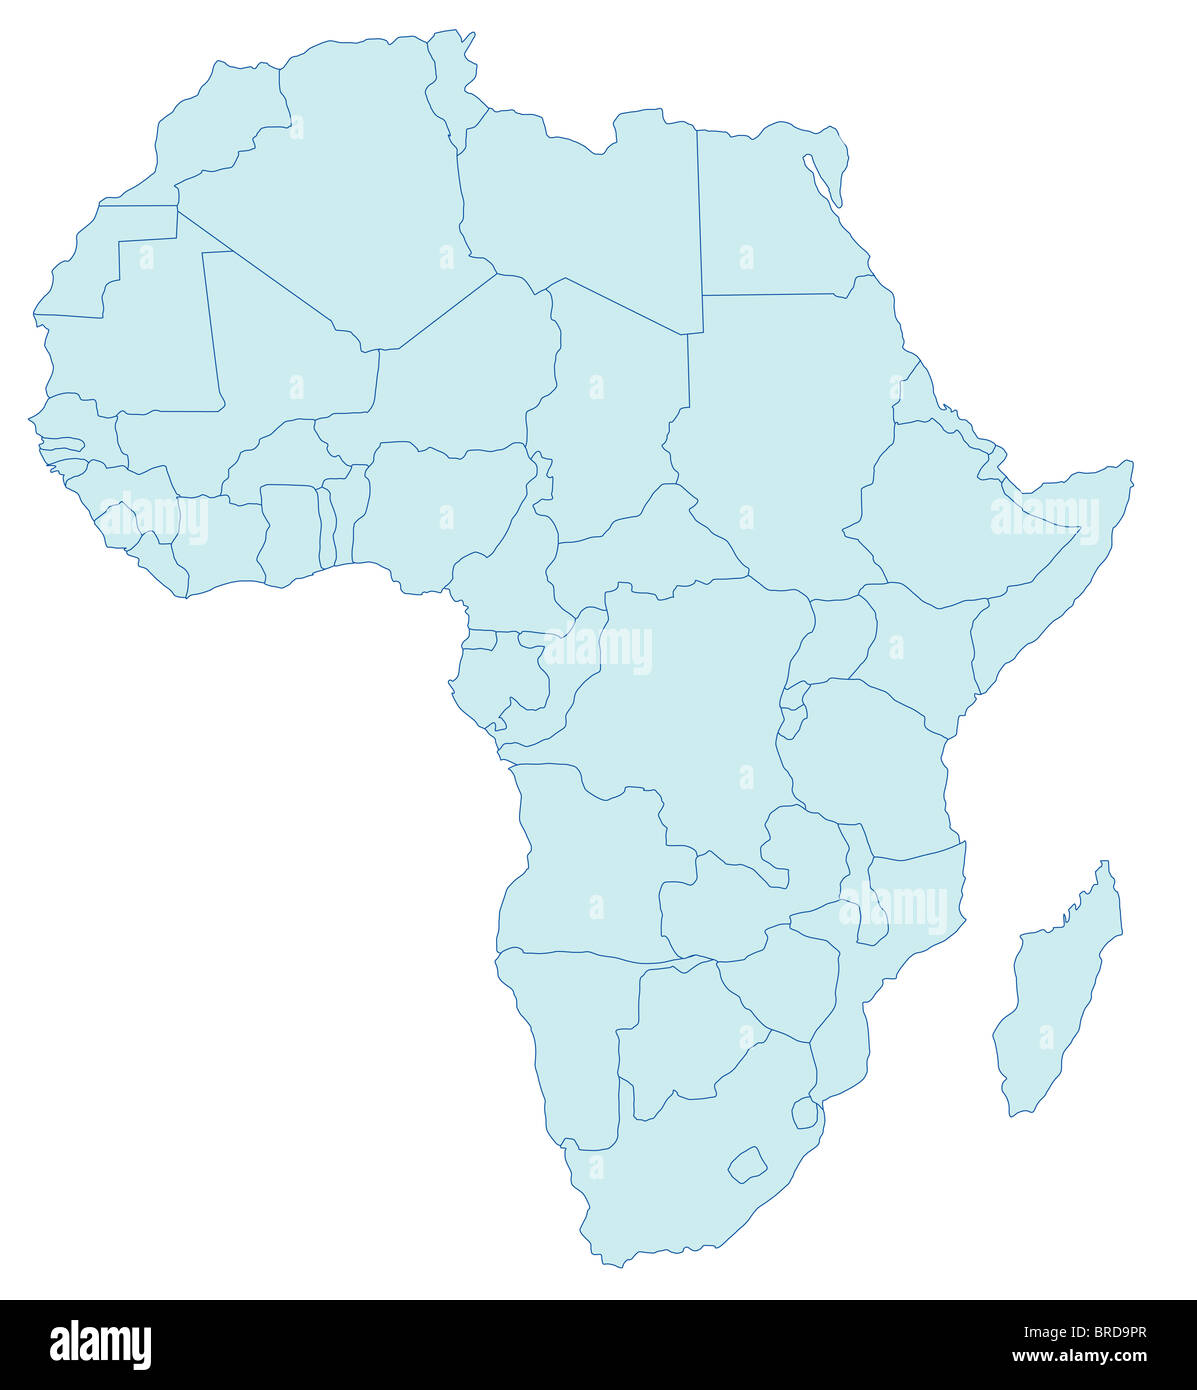 Stylized map of Africa in blue tone showing the different countries. All on white background. Stock Photo